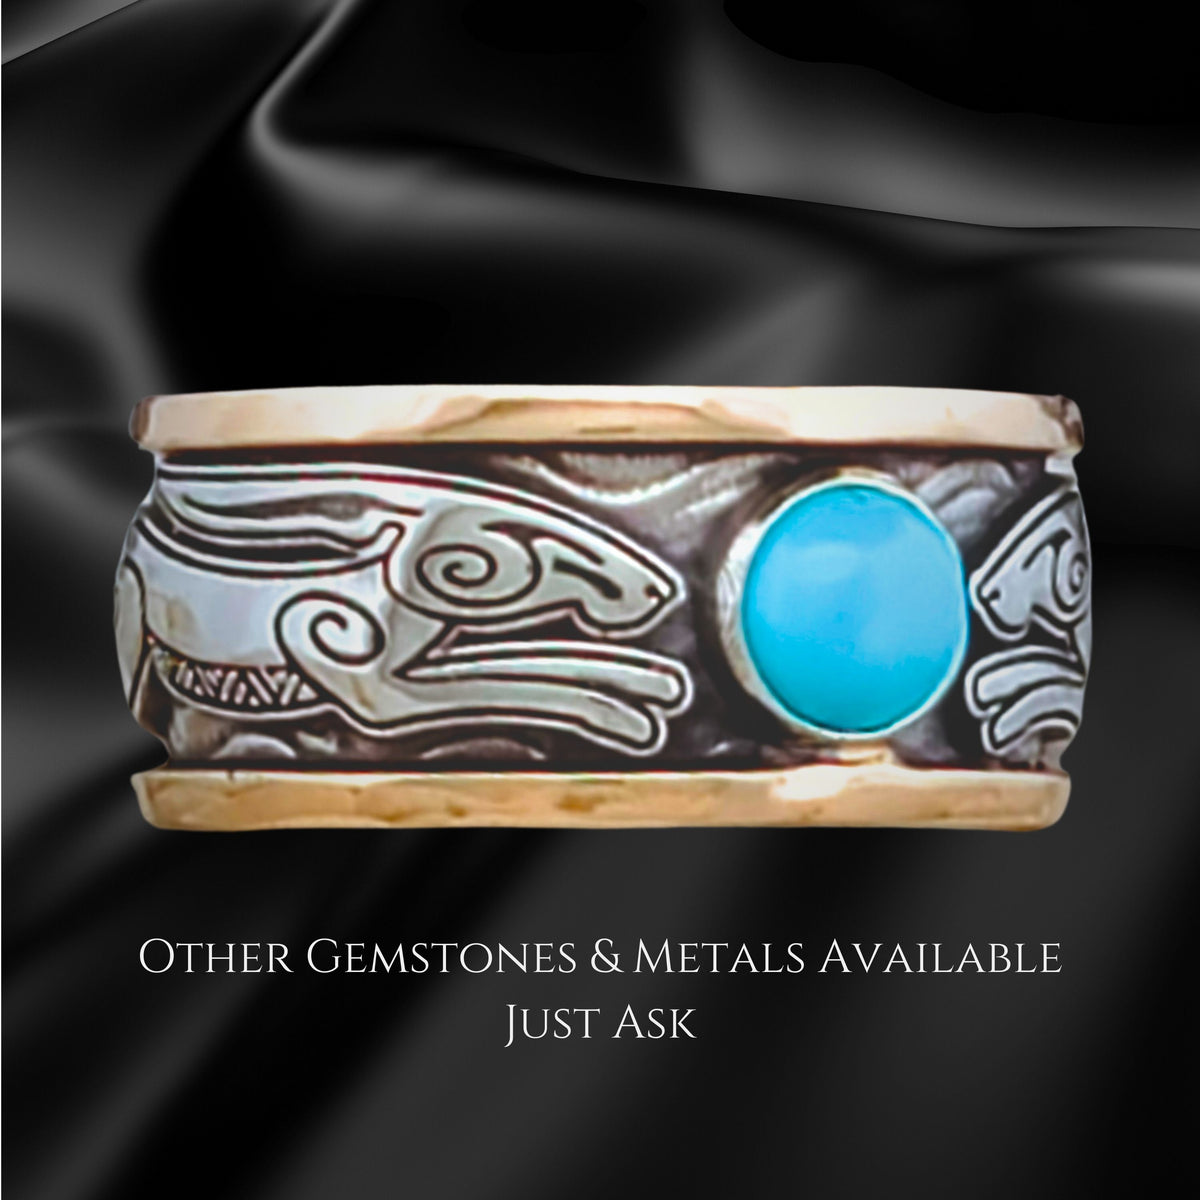 FREYJA&#39;S HARES SOLITAIRE BAND RING with TURQUOISE CABACHON 10KT 2-TONE GOLD